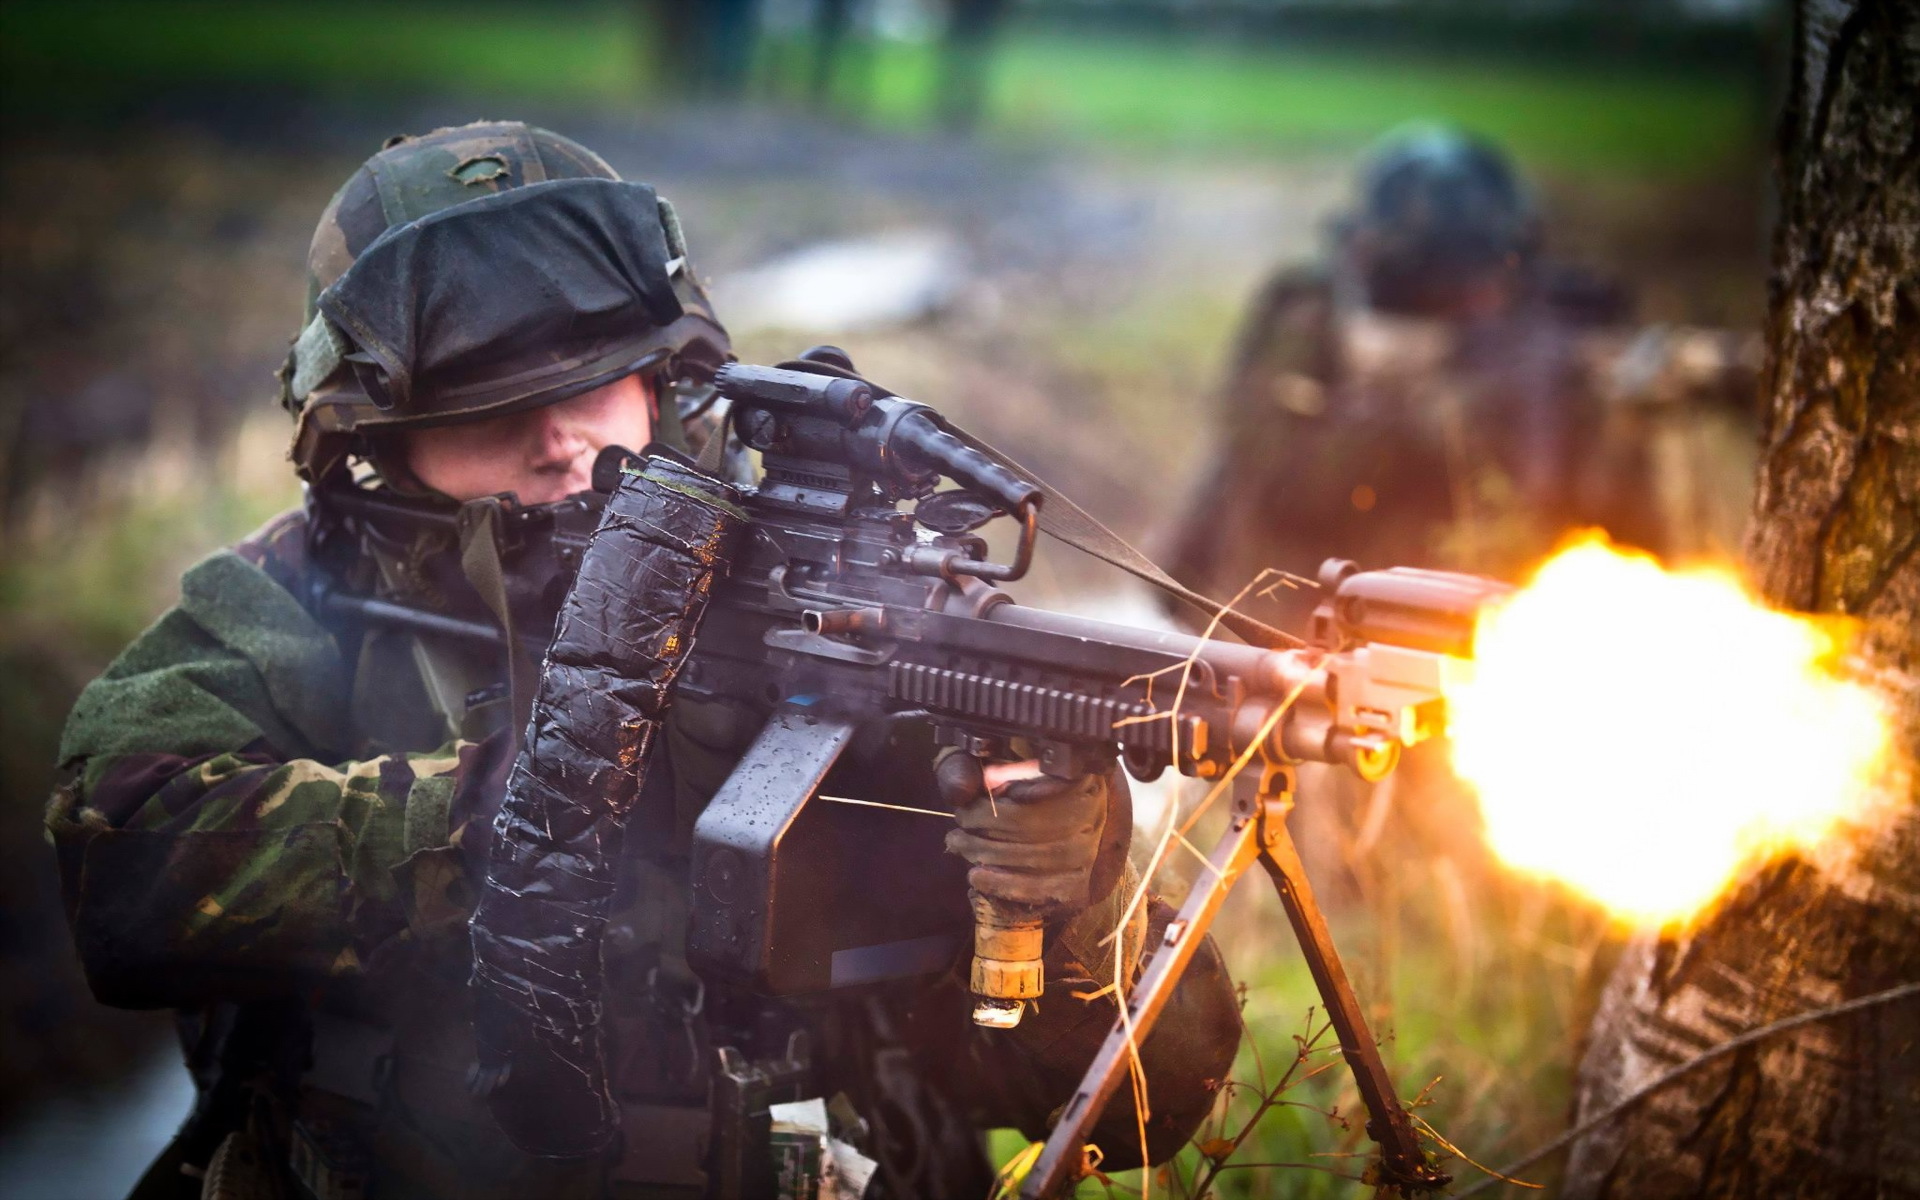 royal, Netherlands, Army, Soldier, Weapon, Gun, Fire, Military Wallpaper